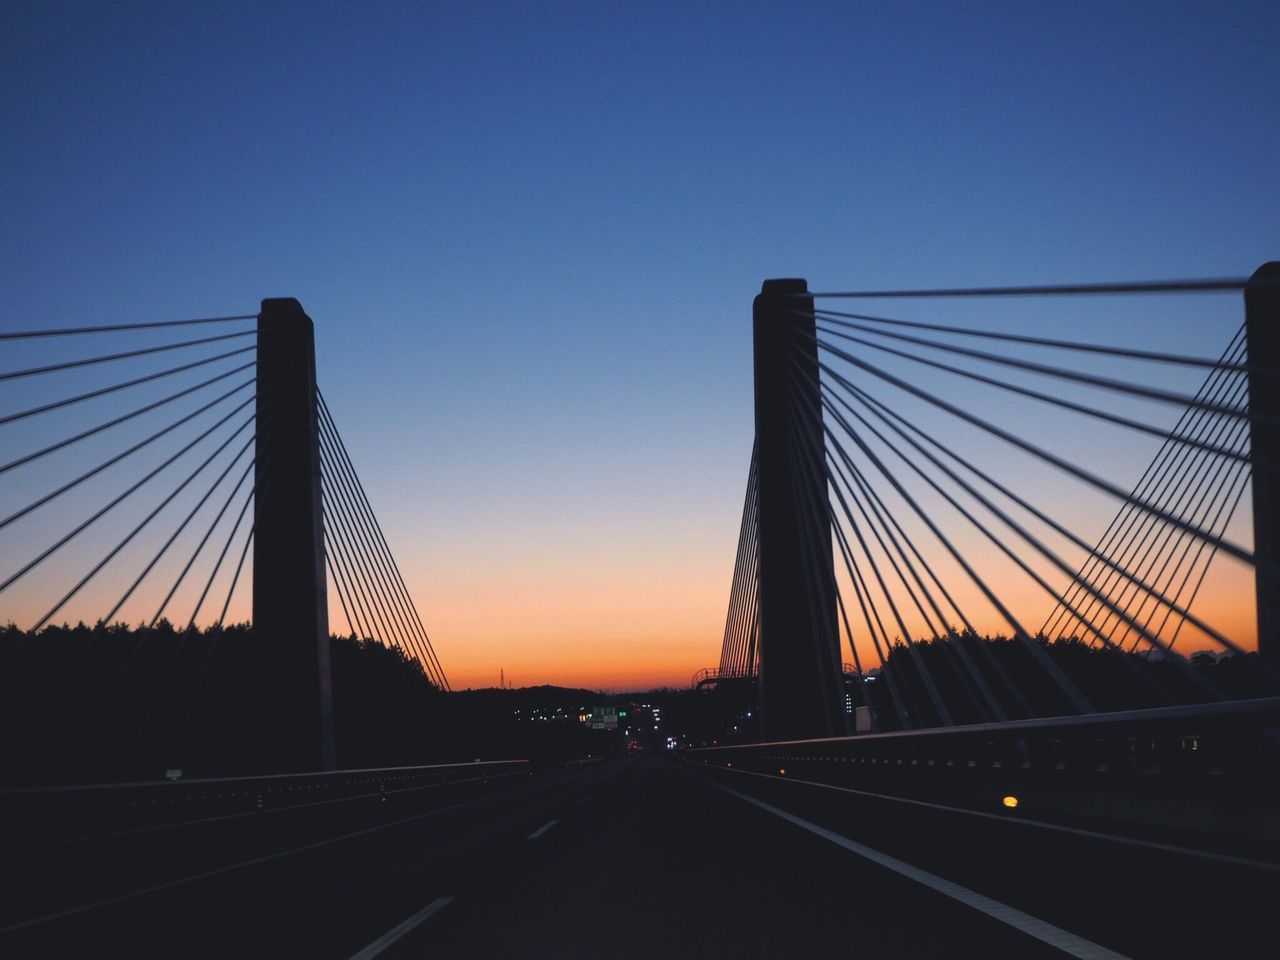 connection, bridge - man made structure, transportation, built structure, suspension bridge, architecture, engineering, outdoors, sky, cable-stayed bridge, road, sunset, bridge, no people, illuminated, day